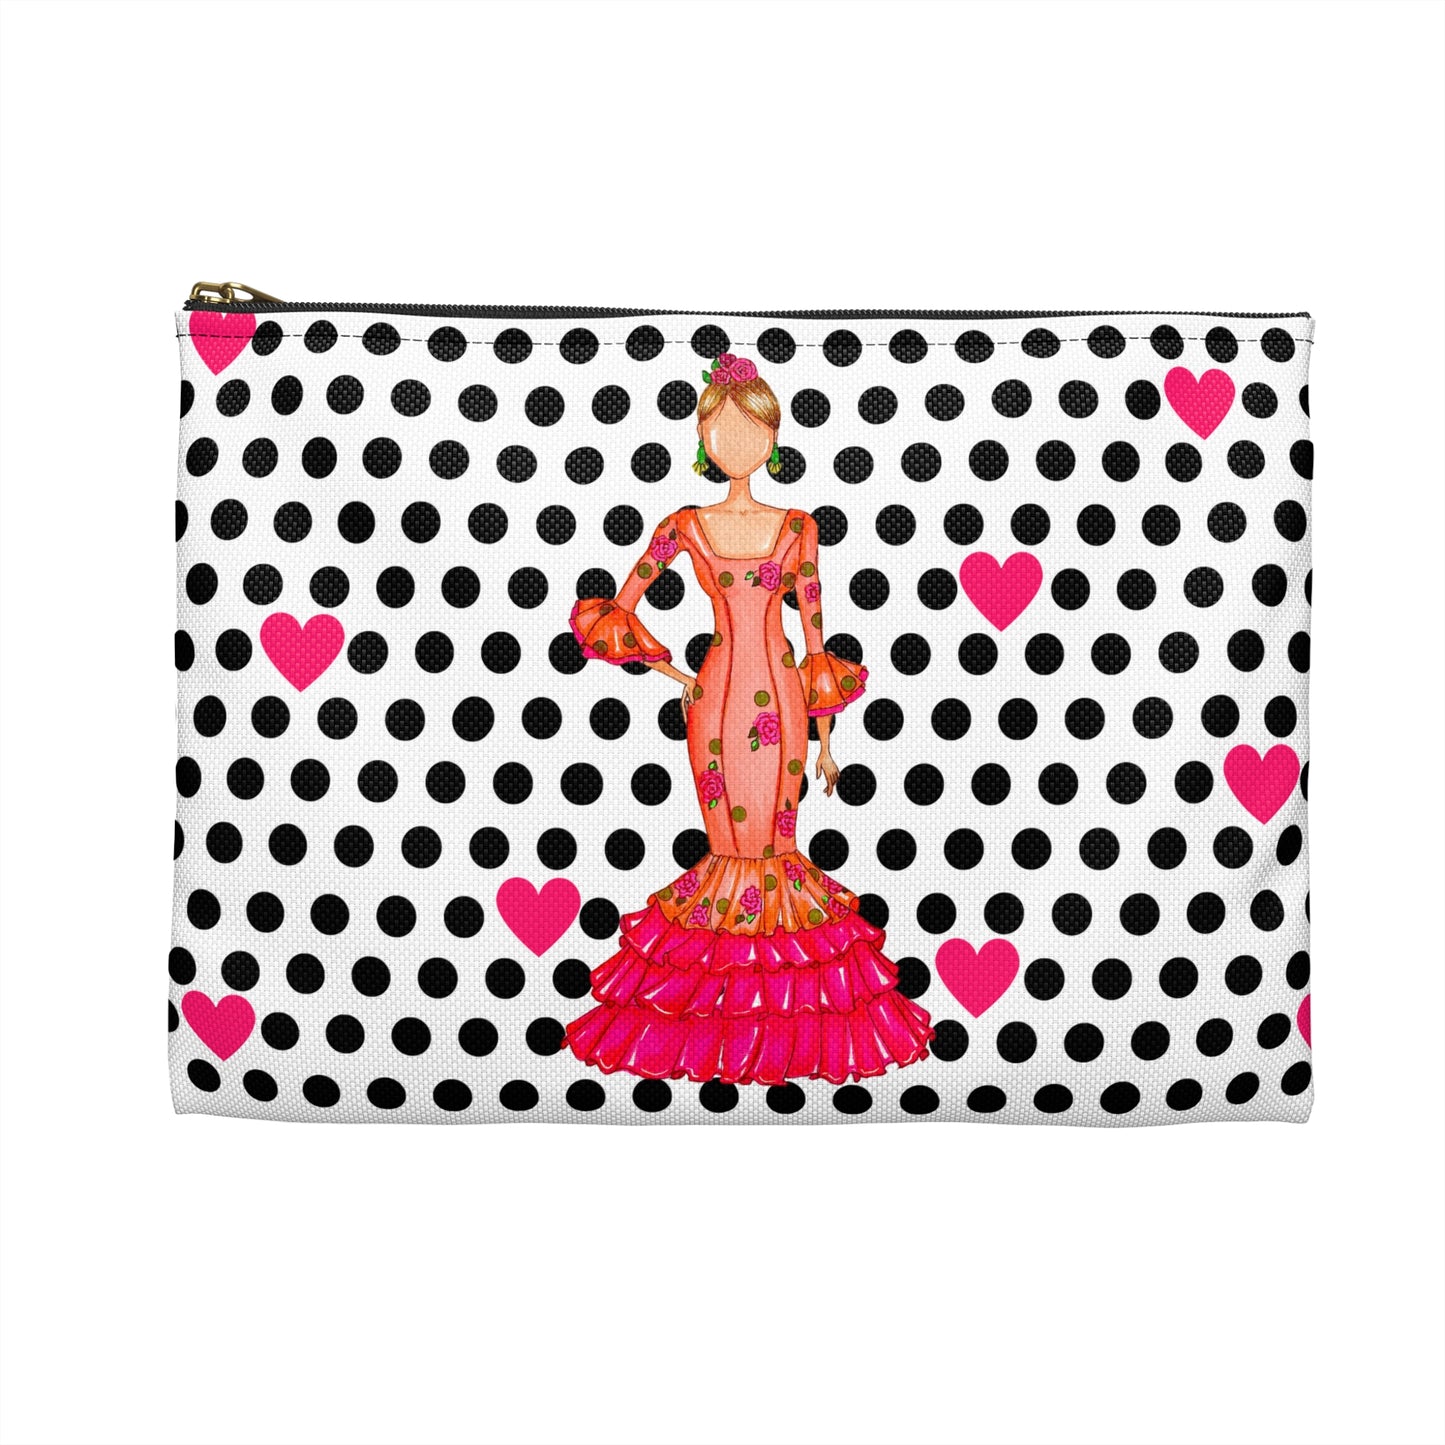 a black and white polka dot bag with a woman in a pink dress